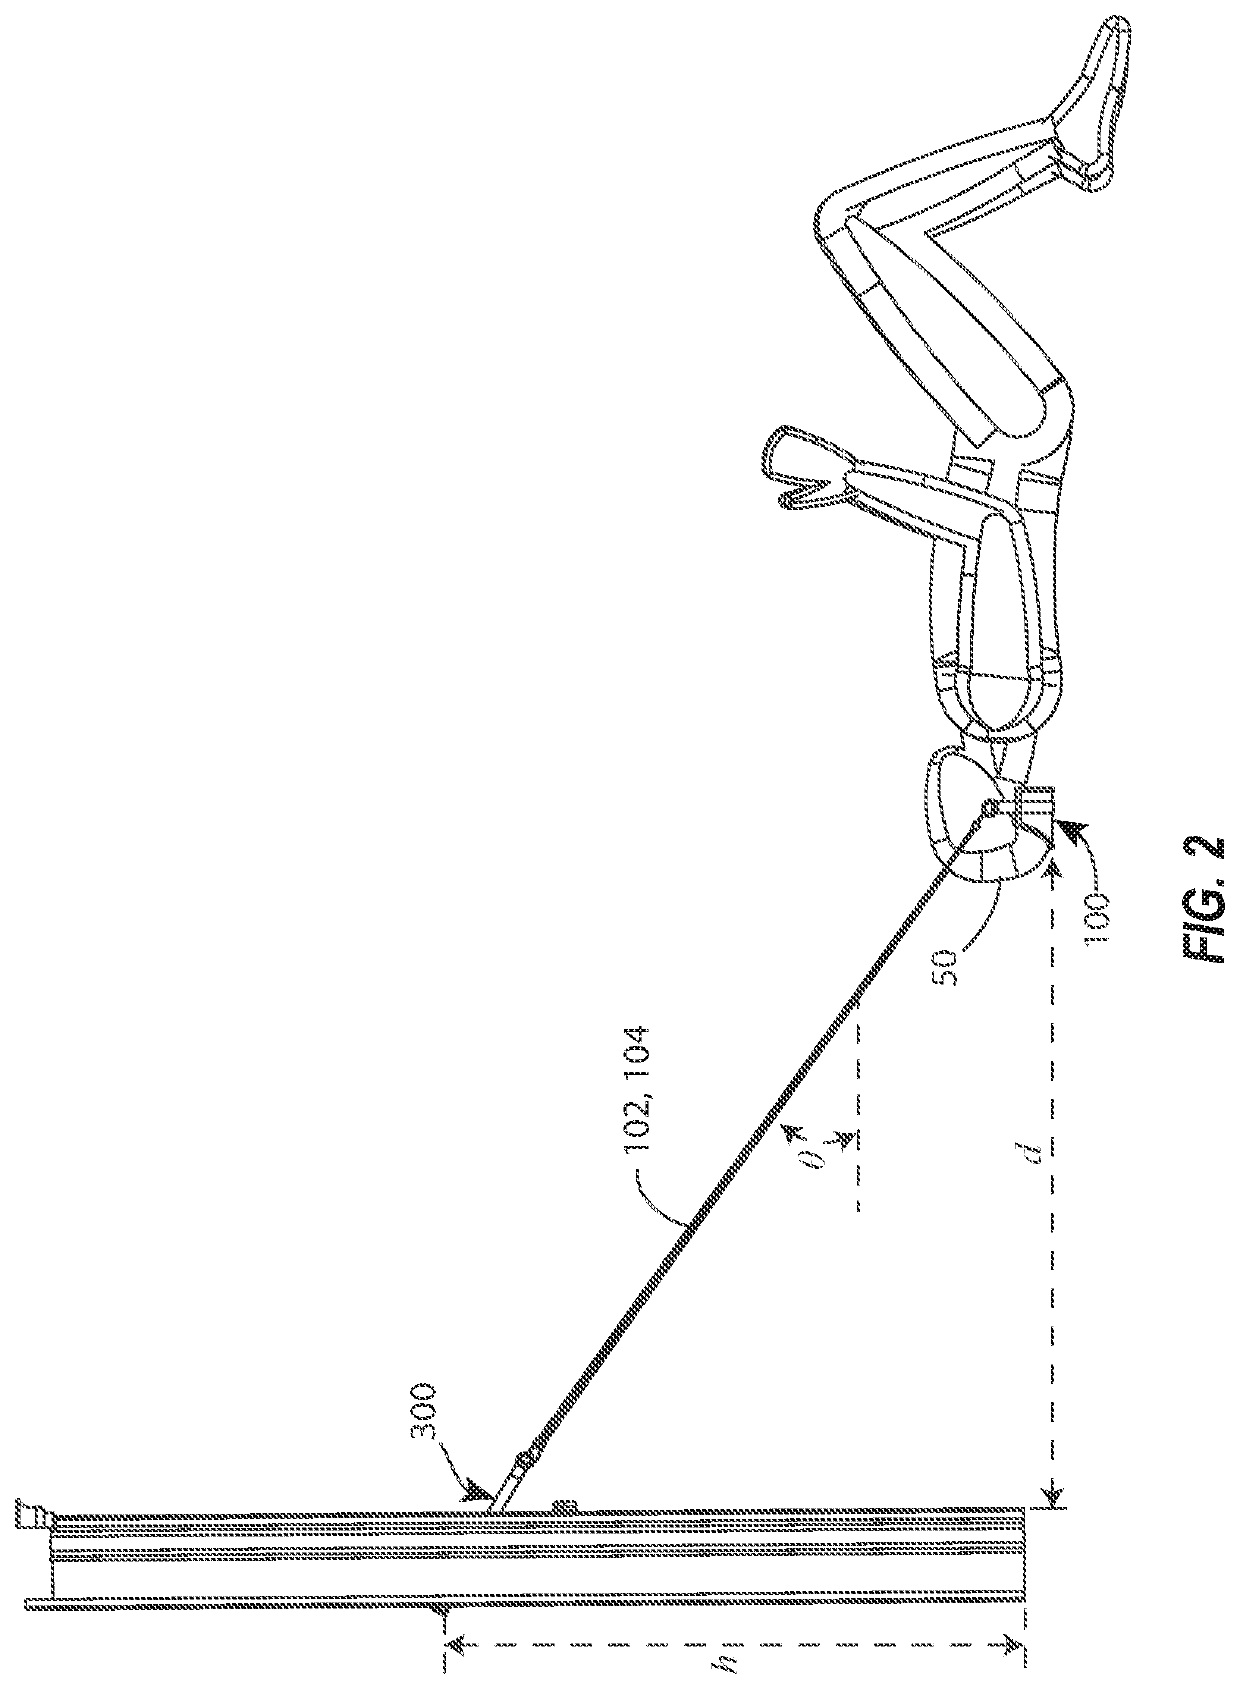 Portable traction device with sling